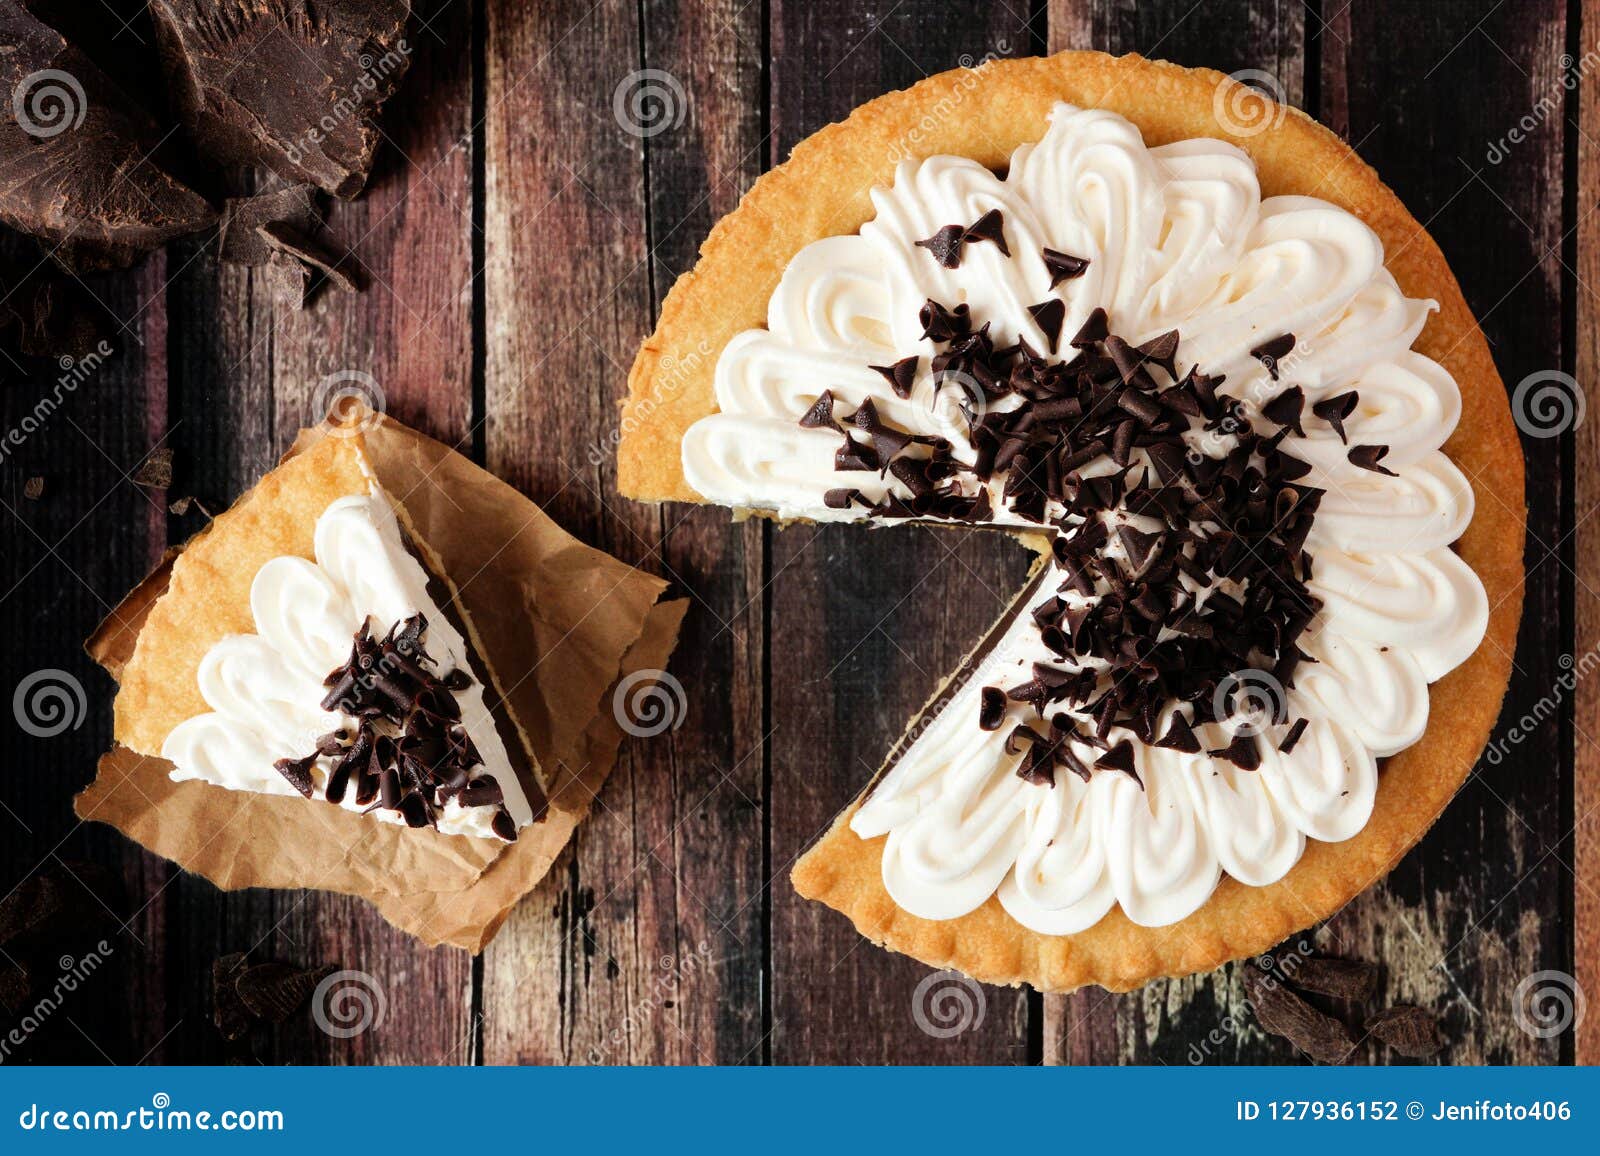 chocolate cream pie, top view scene with slice removed on dark wood